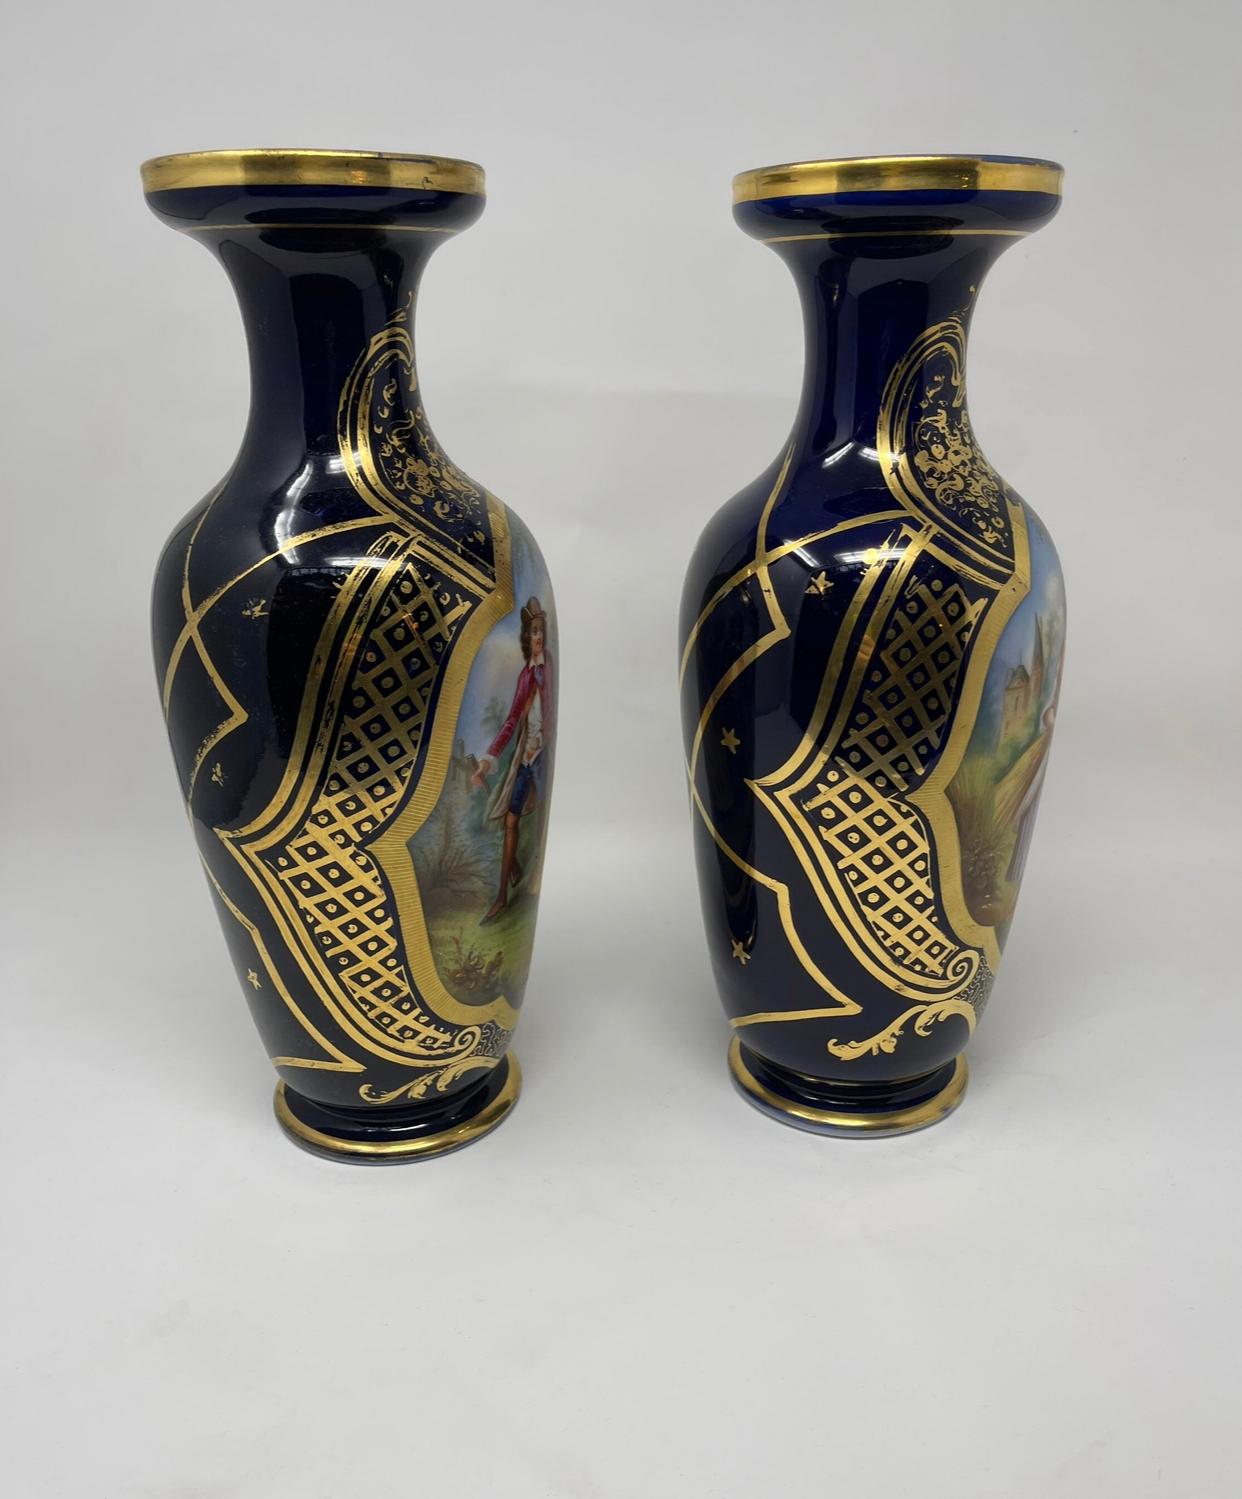 Antique French Gilded Porcelain Vases with Hand Painted Courting Scene - Pair For Sale 1